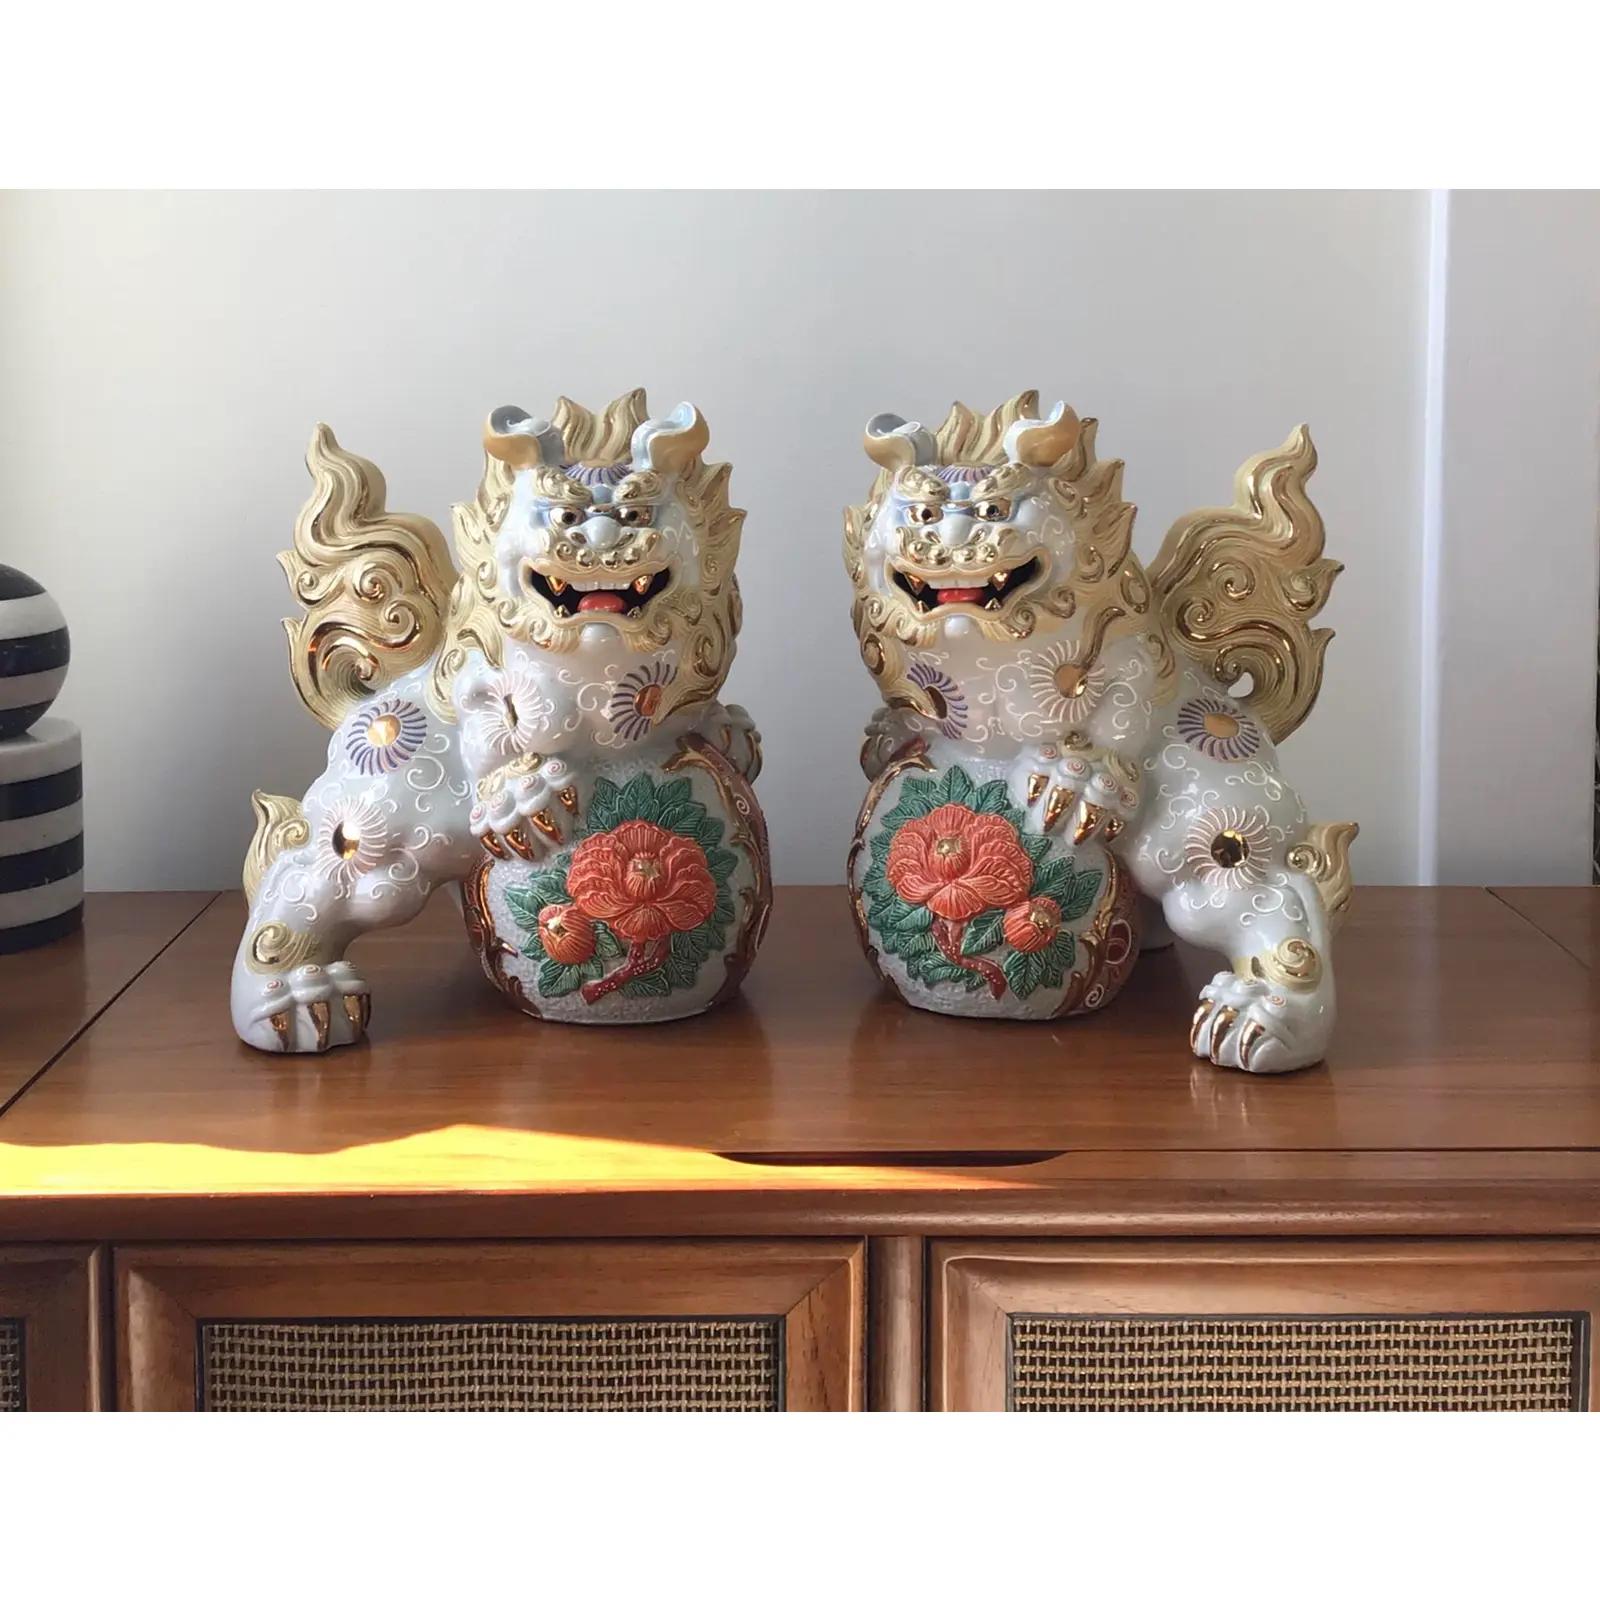 Pair of Japanese Satsuma Kutani Porcelain Foo Dogs Sculptures/Figurines In Good Condition For Sale In W Allenhurst, NJ